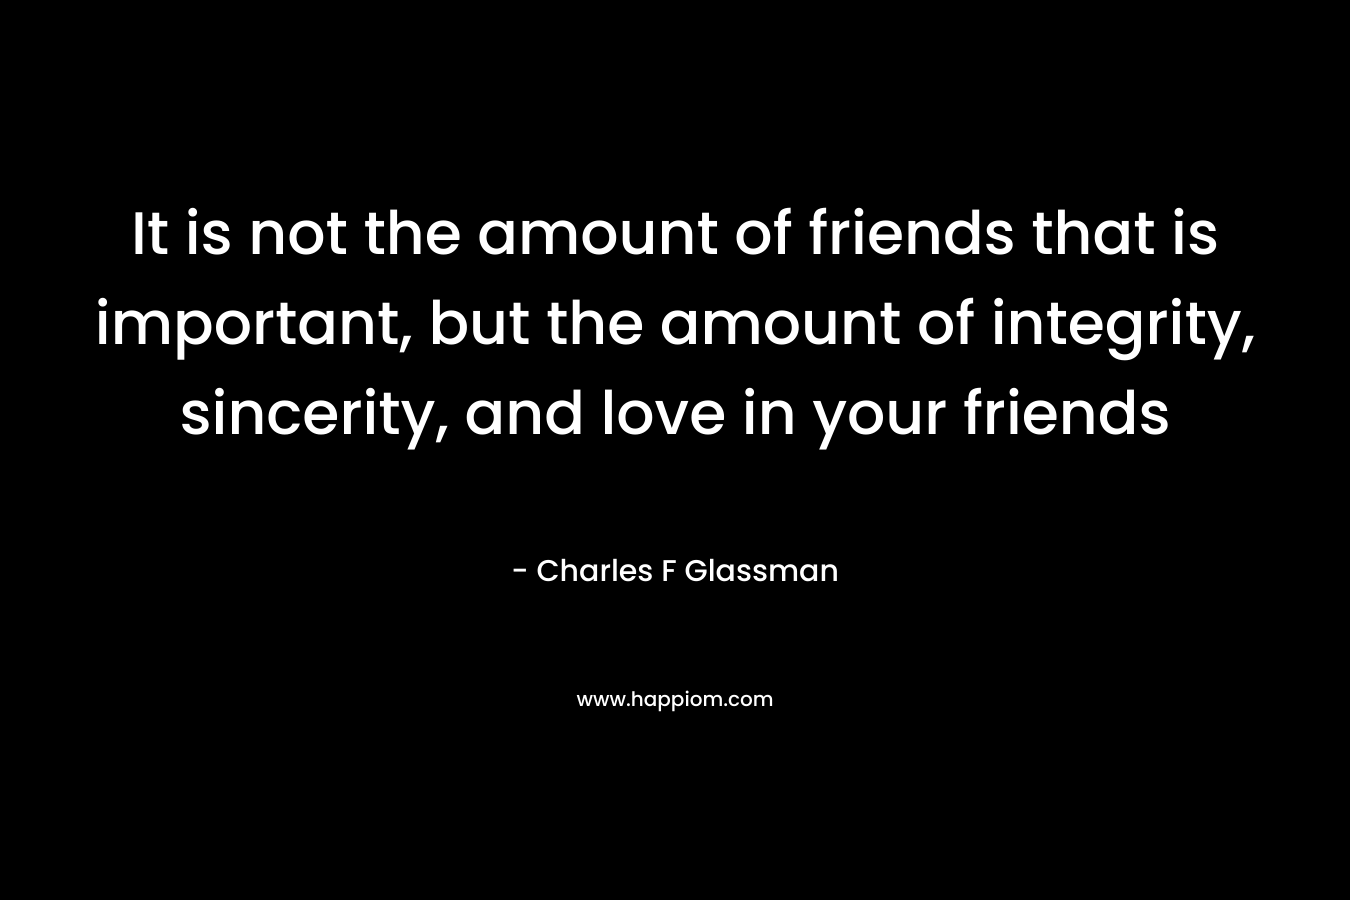 It is not the amount of friends that is important, but the amount of integrity, sincerity, and love in your friends – Charles F Glassman